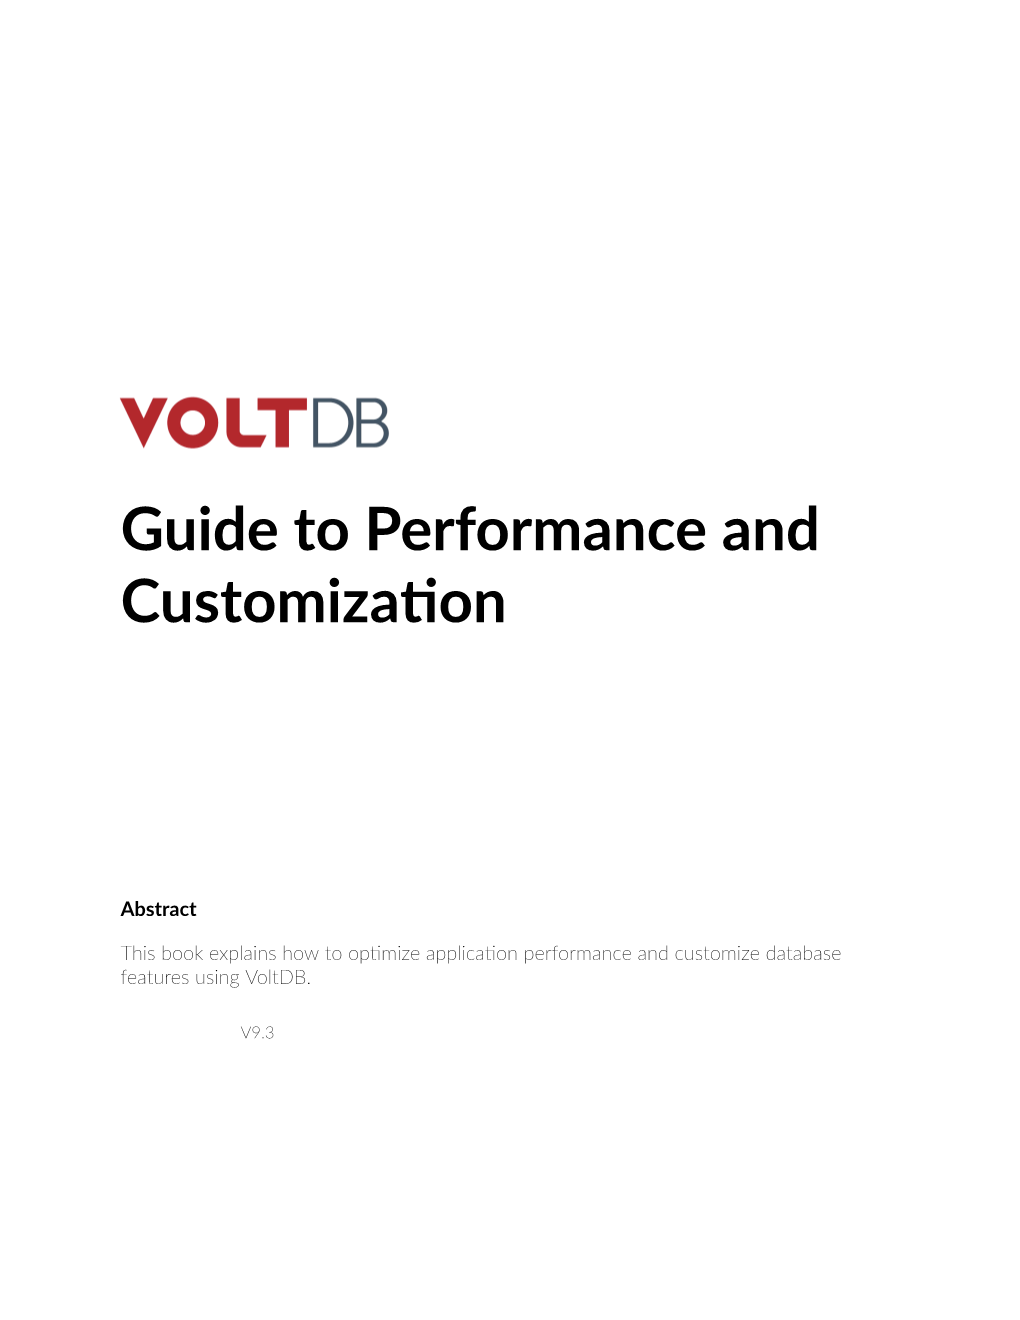 Guide to Performance and Customization